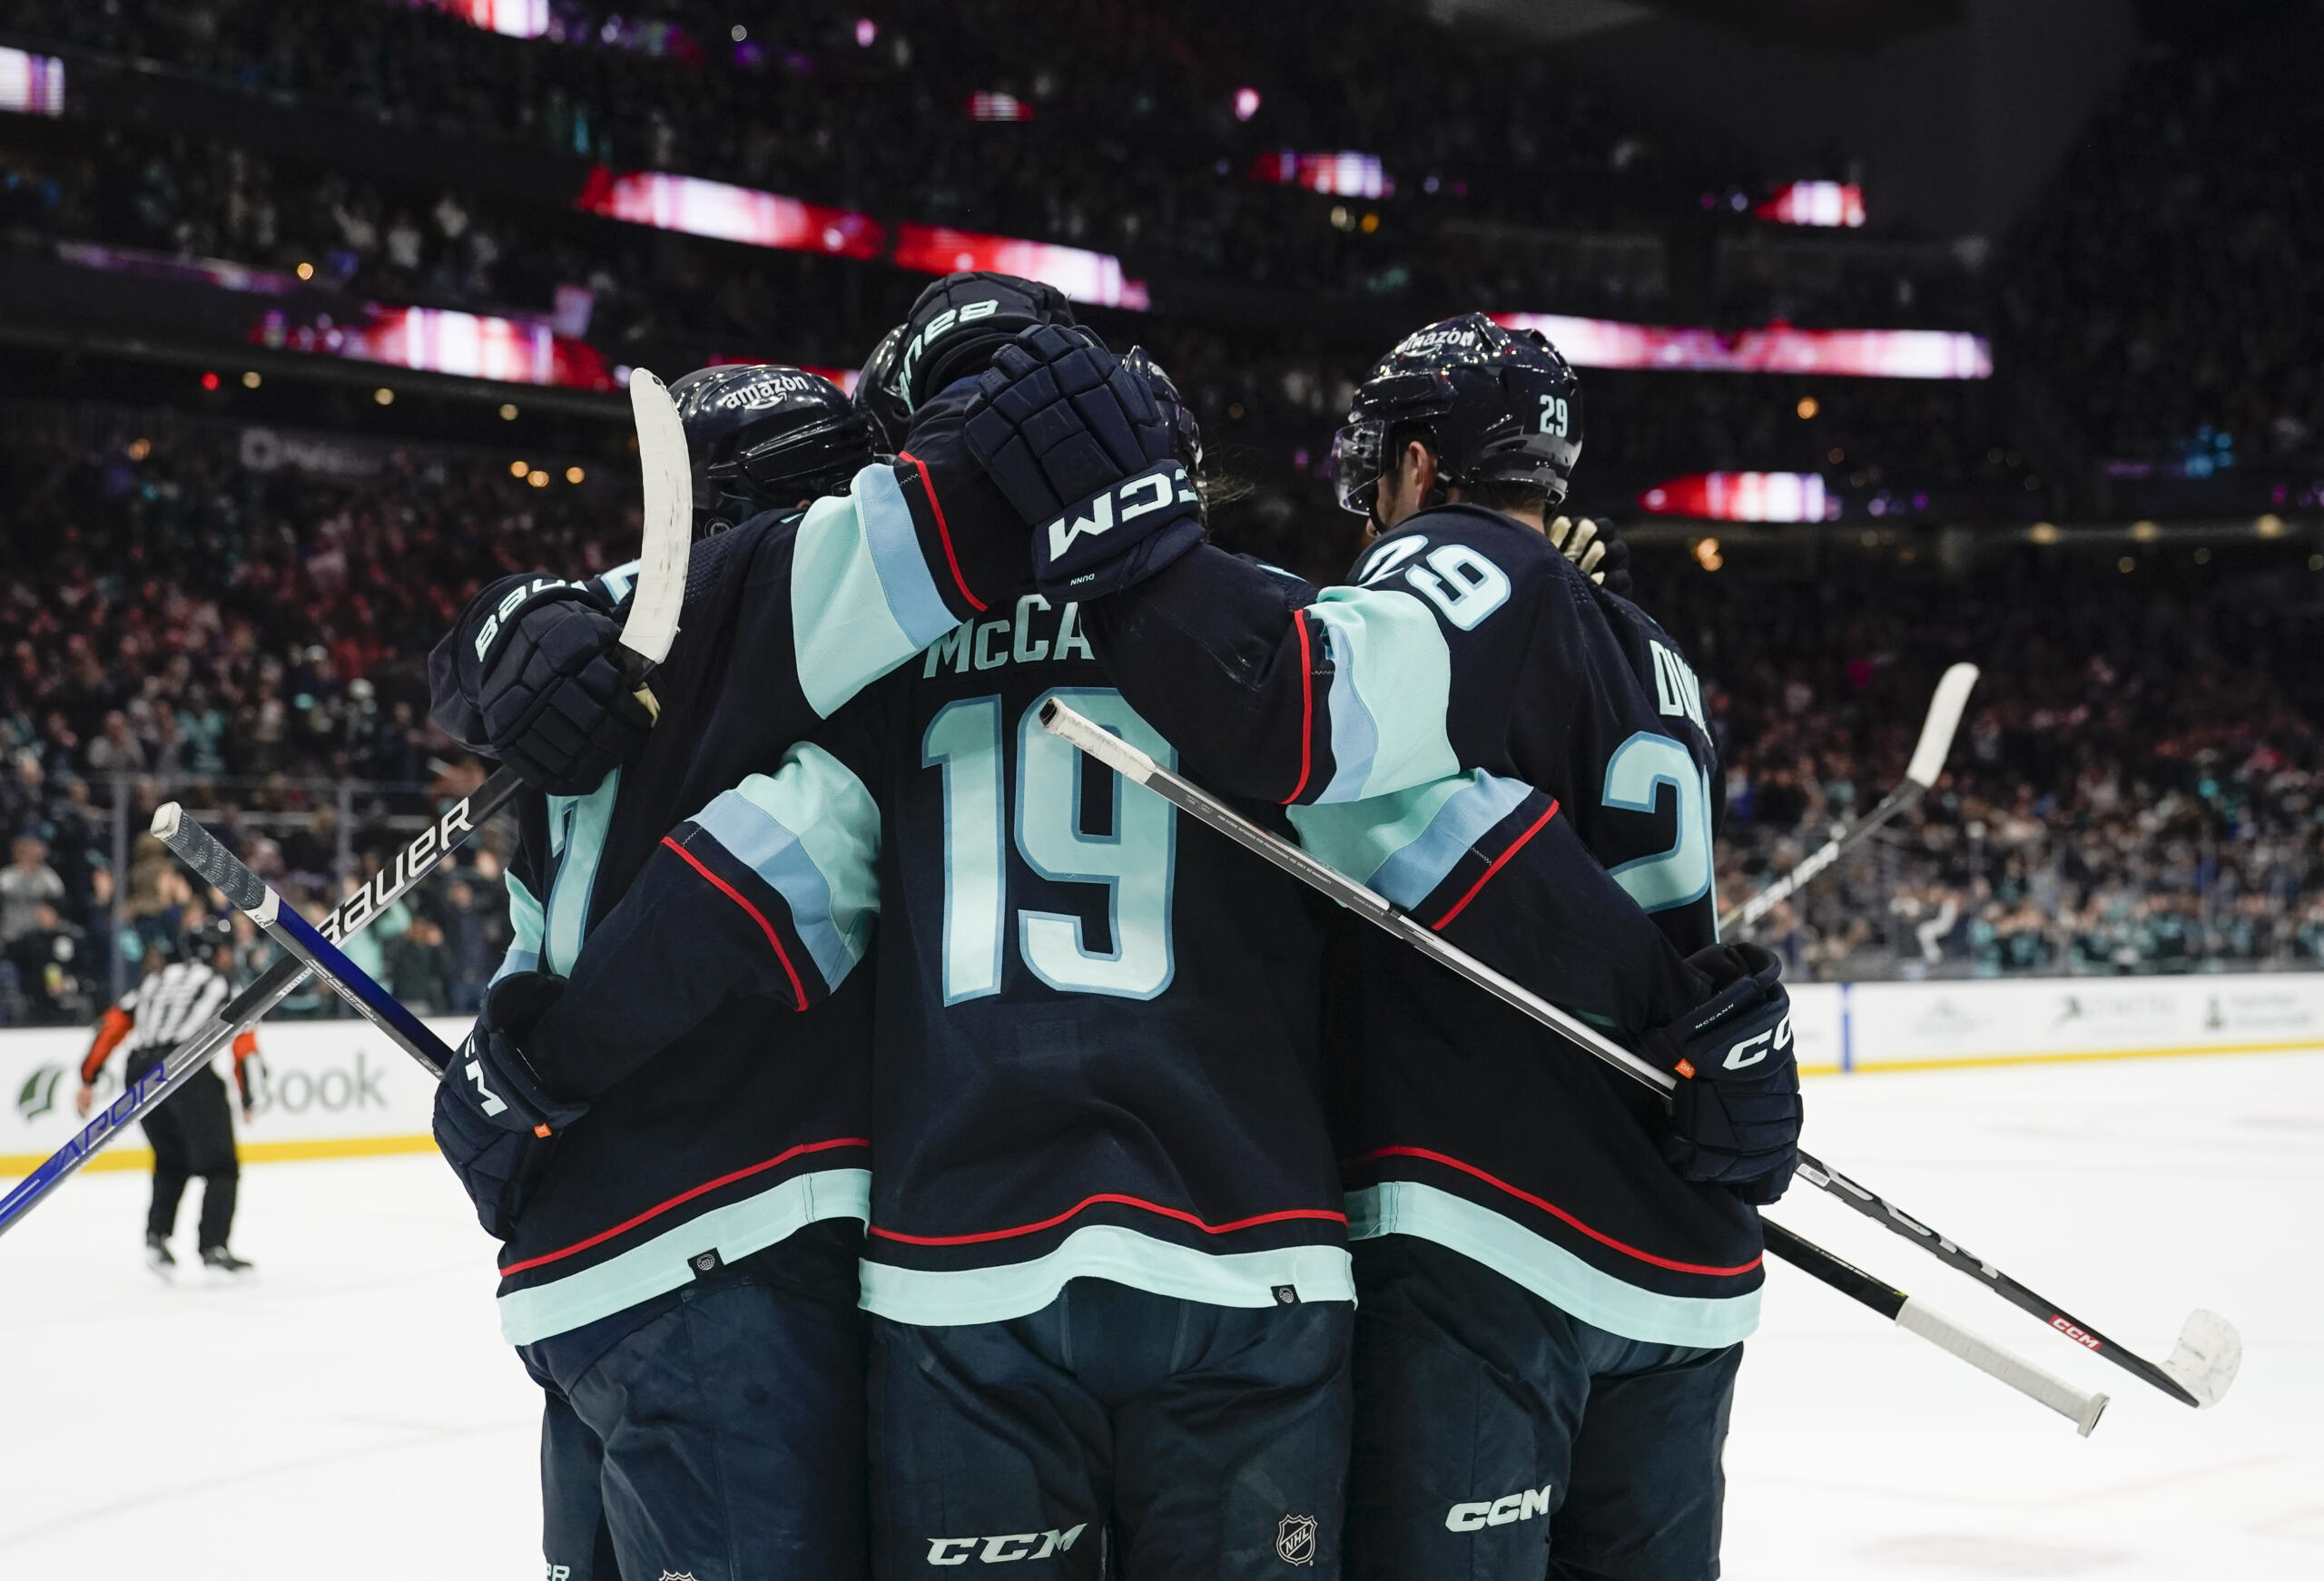 Seattle Kraken left wing Jared McCann (19) and teammates celebrate his goal against the Arizona Coyotes during the first period of an NHL hockey game Thursday, April 6, 2023, in Seattle.